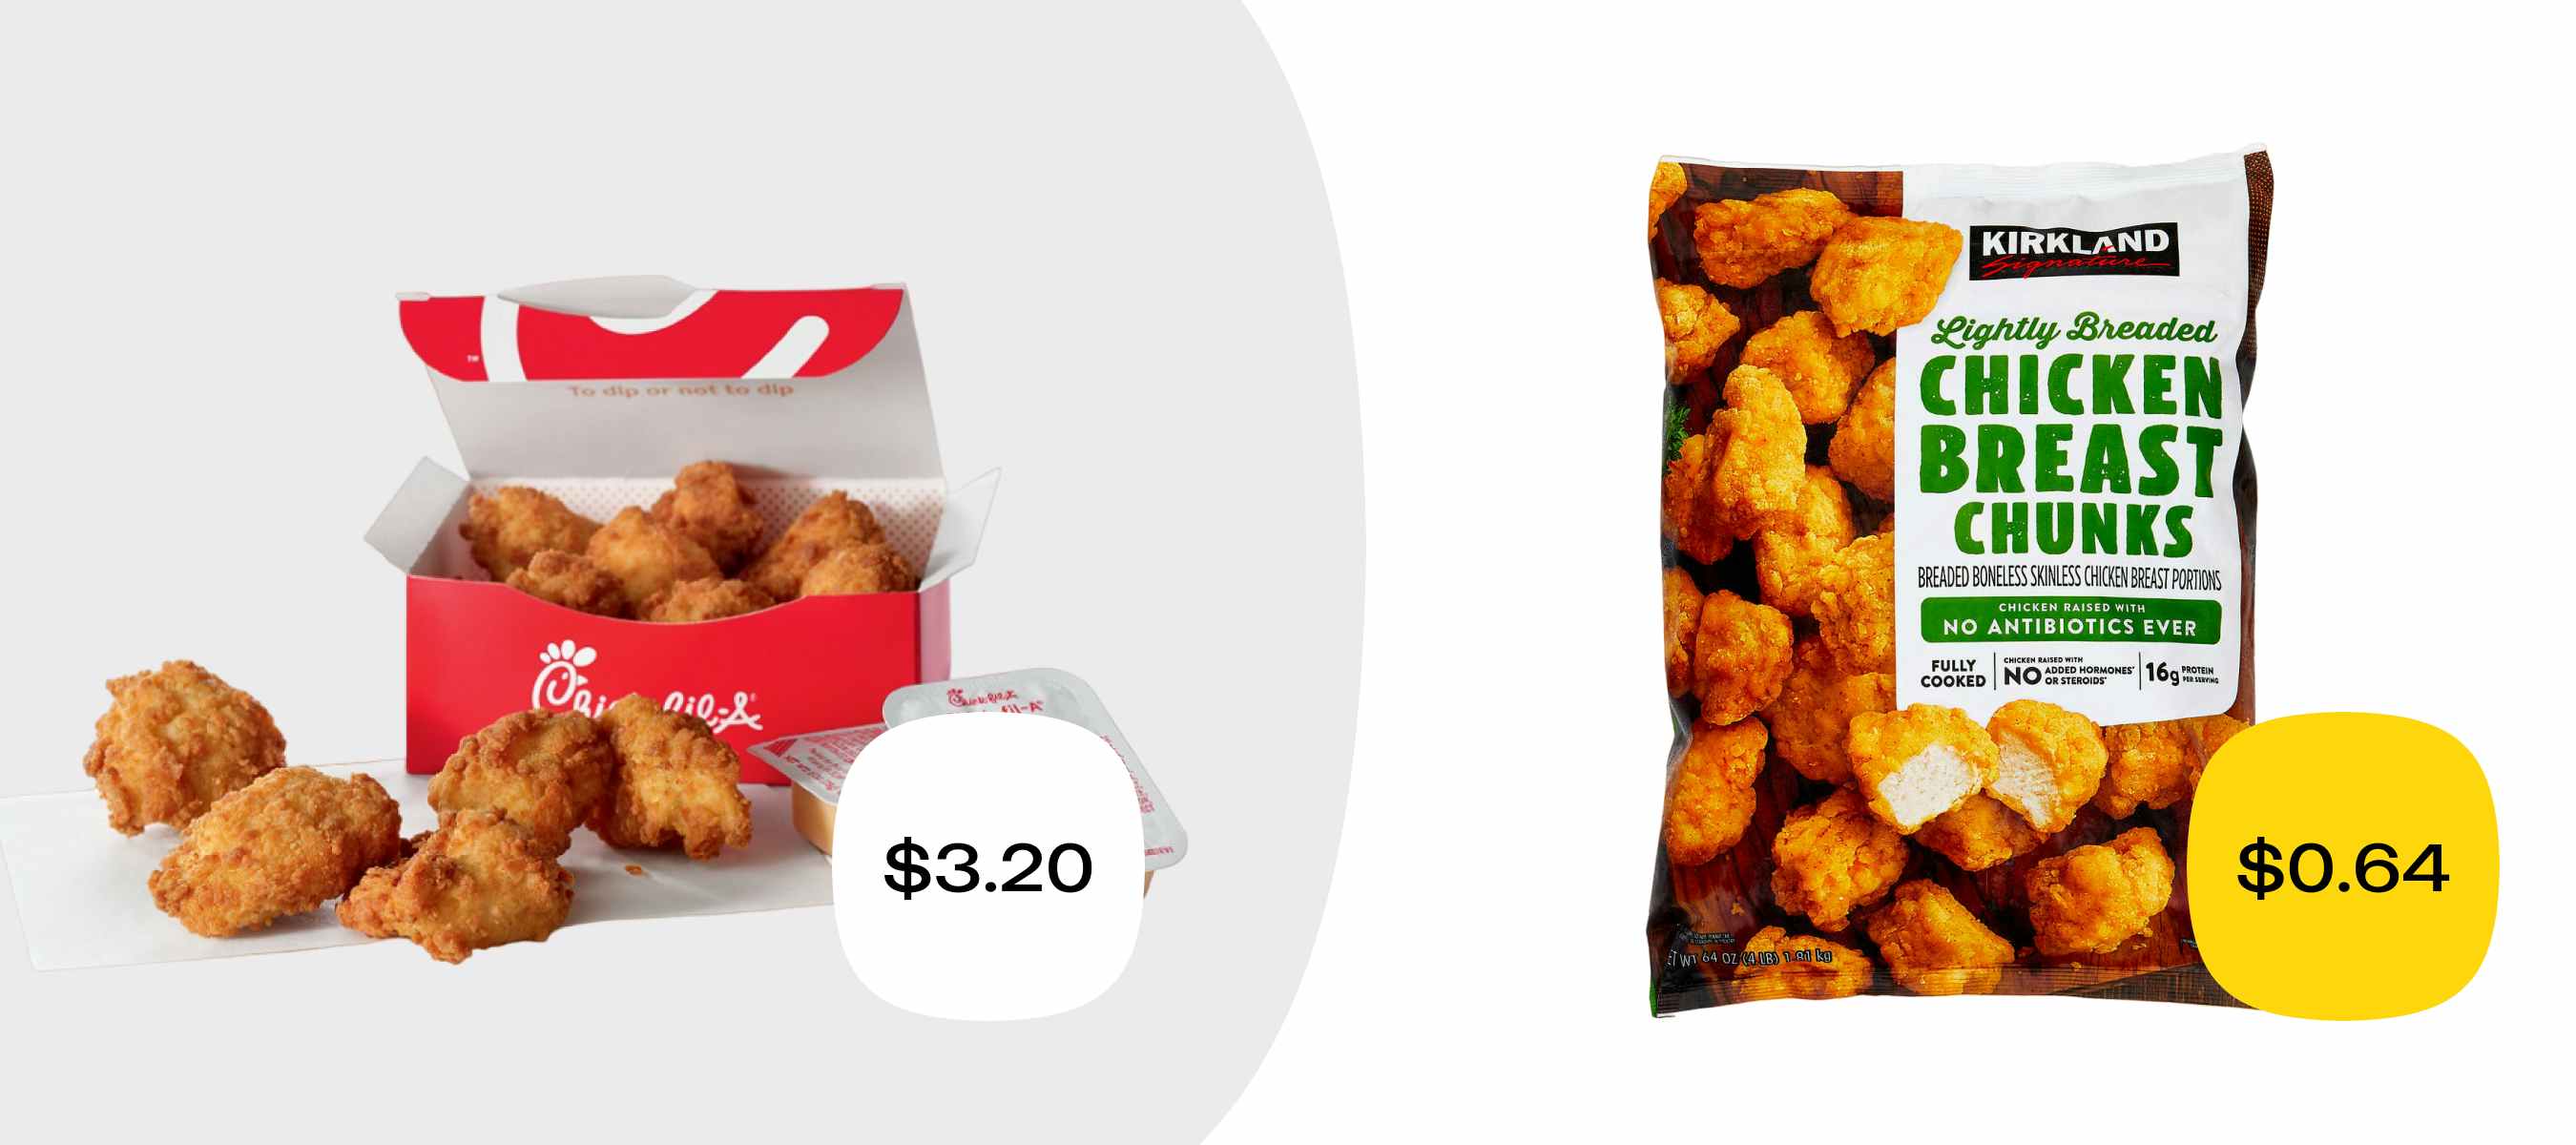 chick fil a chicken nuggets for $3.20 versus the same amount from Costco for $0.64